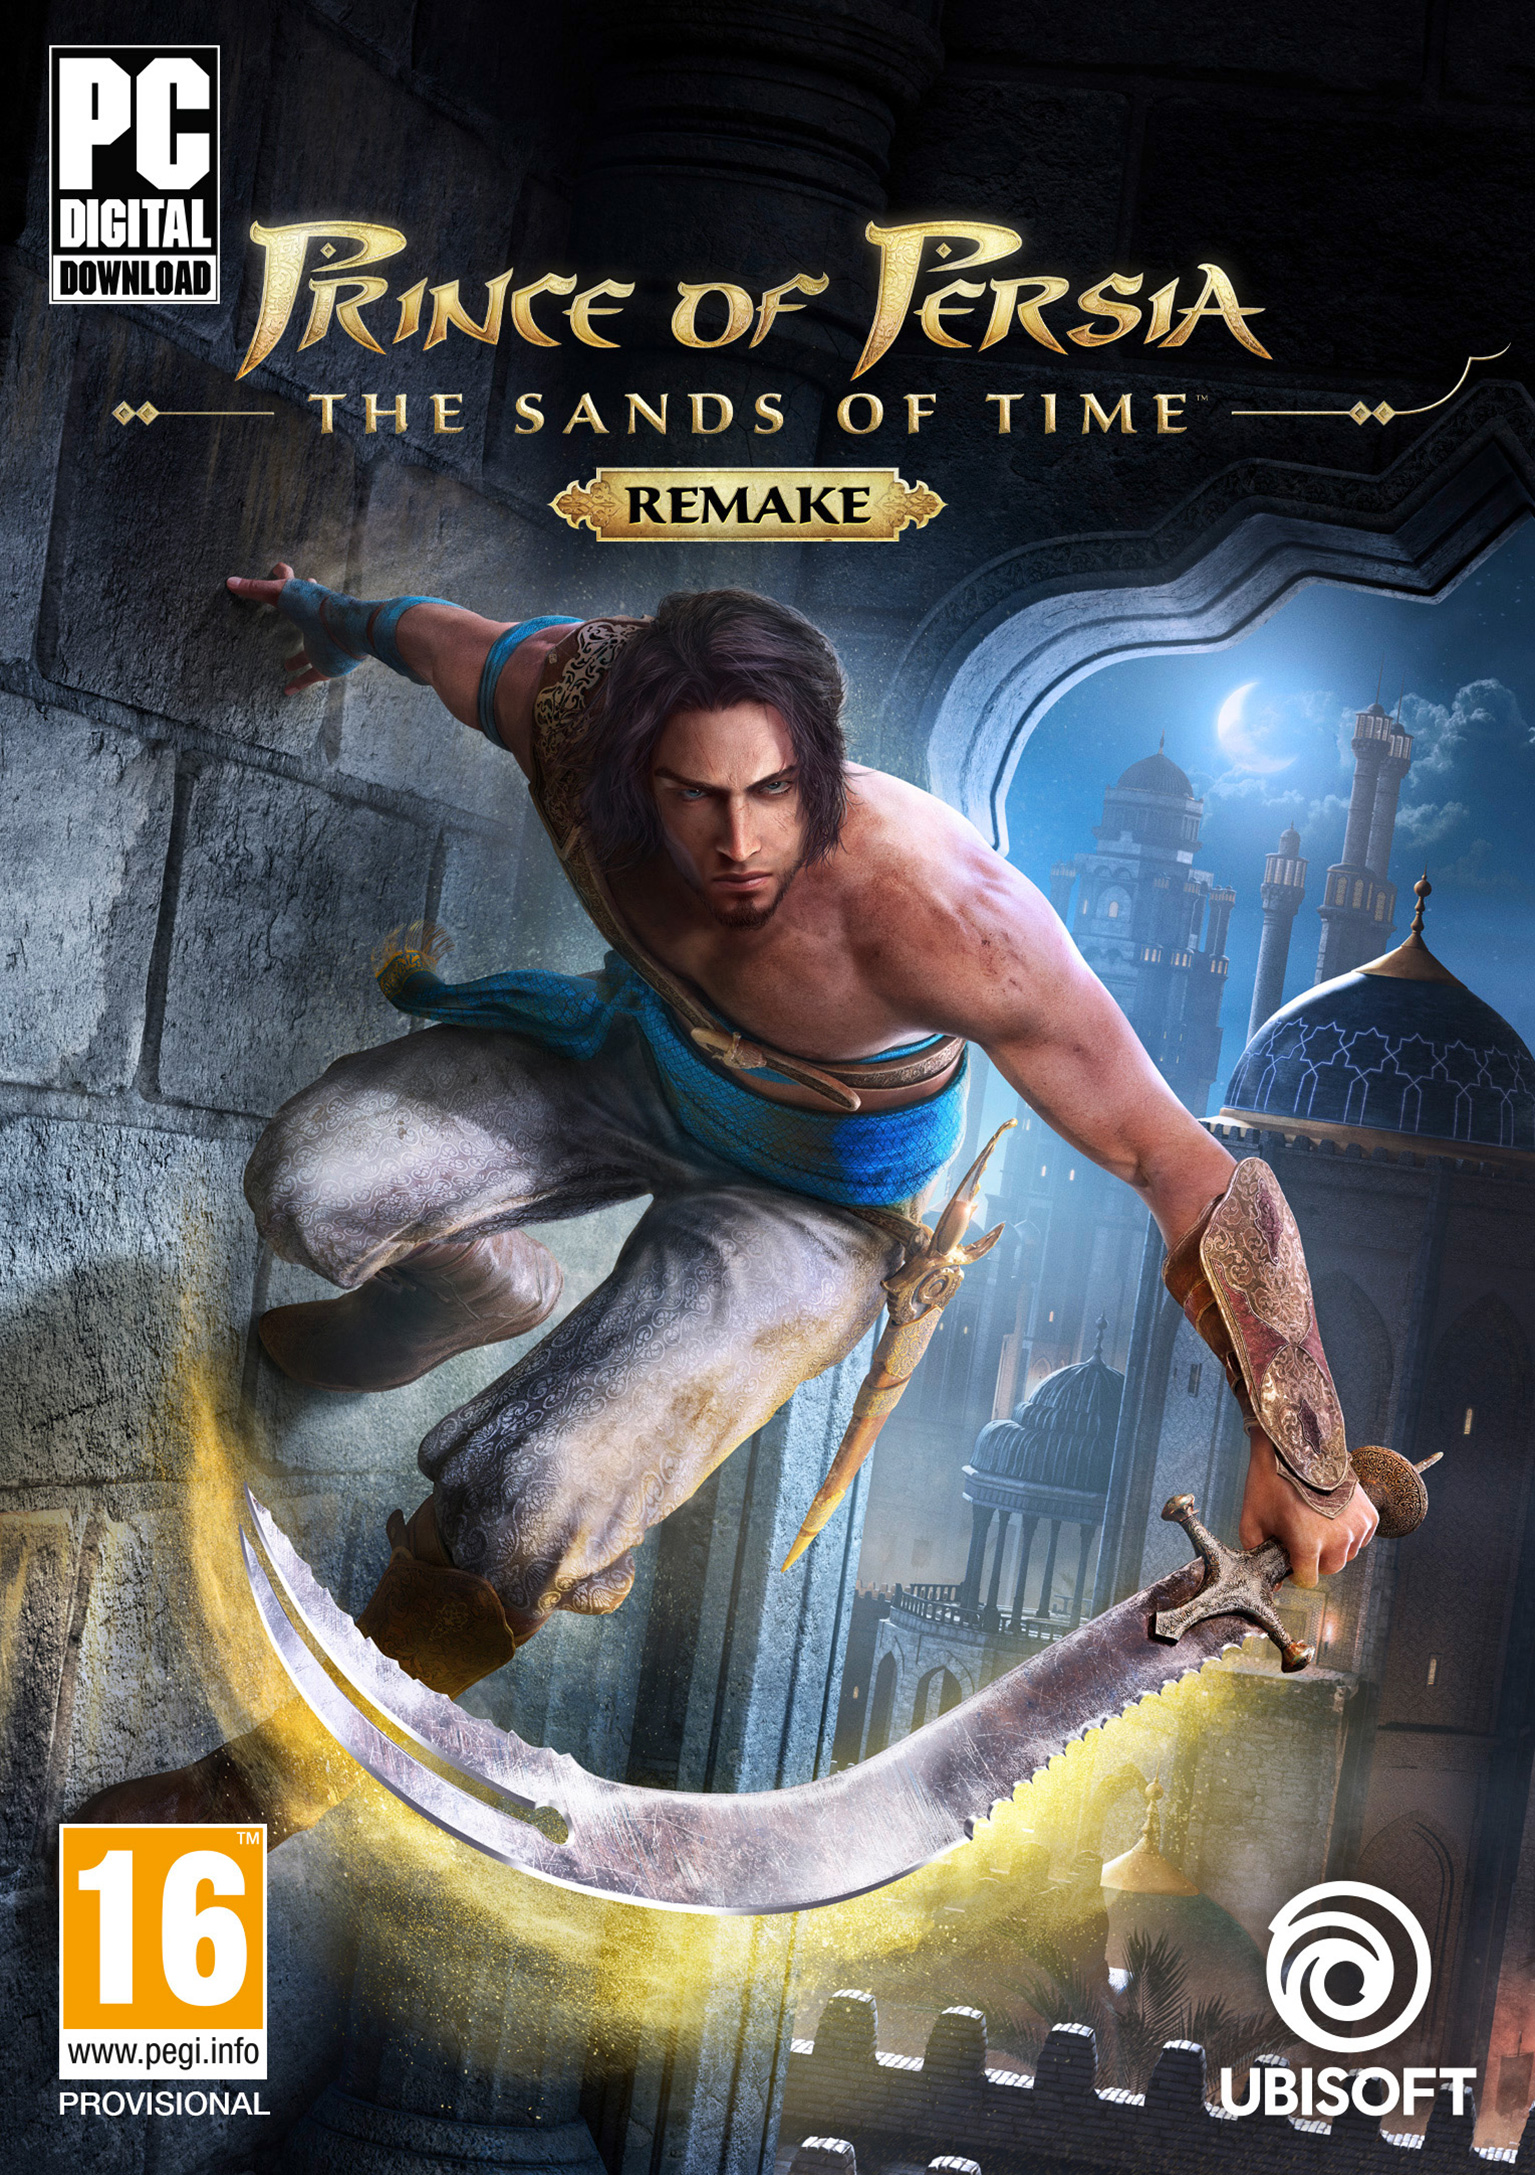 Prince of Persia: The Sands of Time Remake - pedn DVD obal